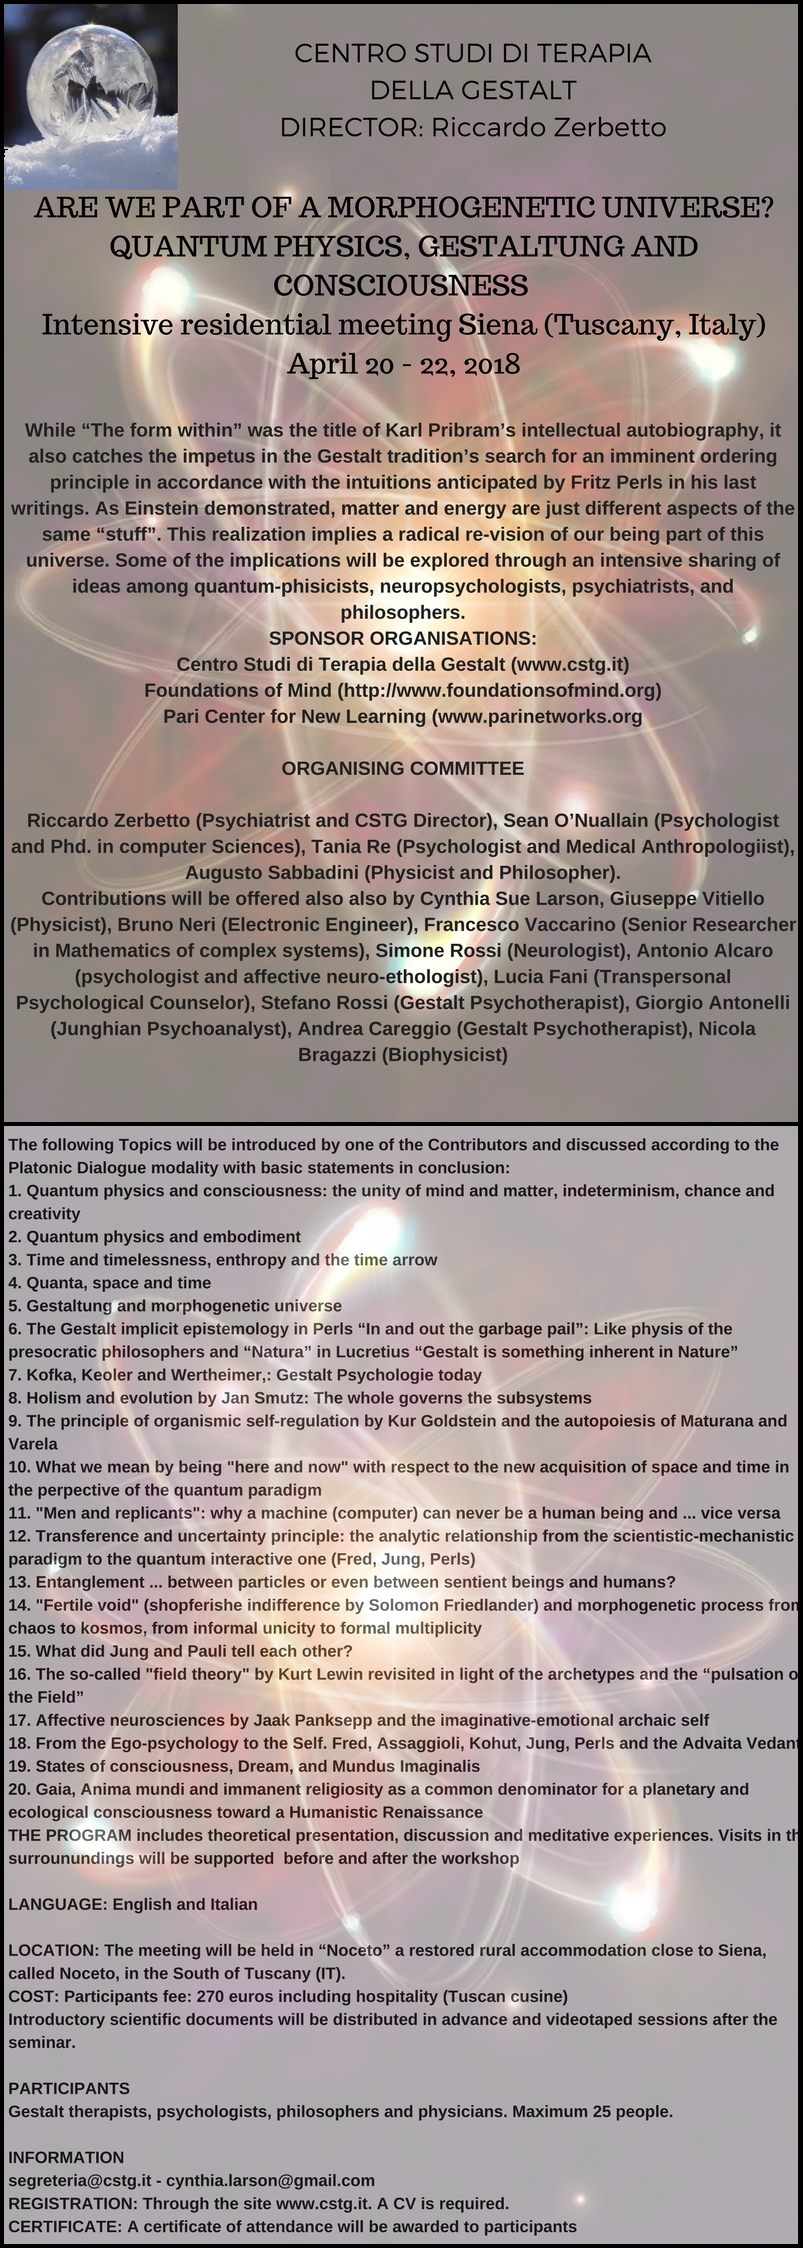 Full flyer for Intensive Residential Meeting: Are We Part of a Morphogenic Universe? -- Tuscany, Italy April 20-22, 2018